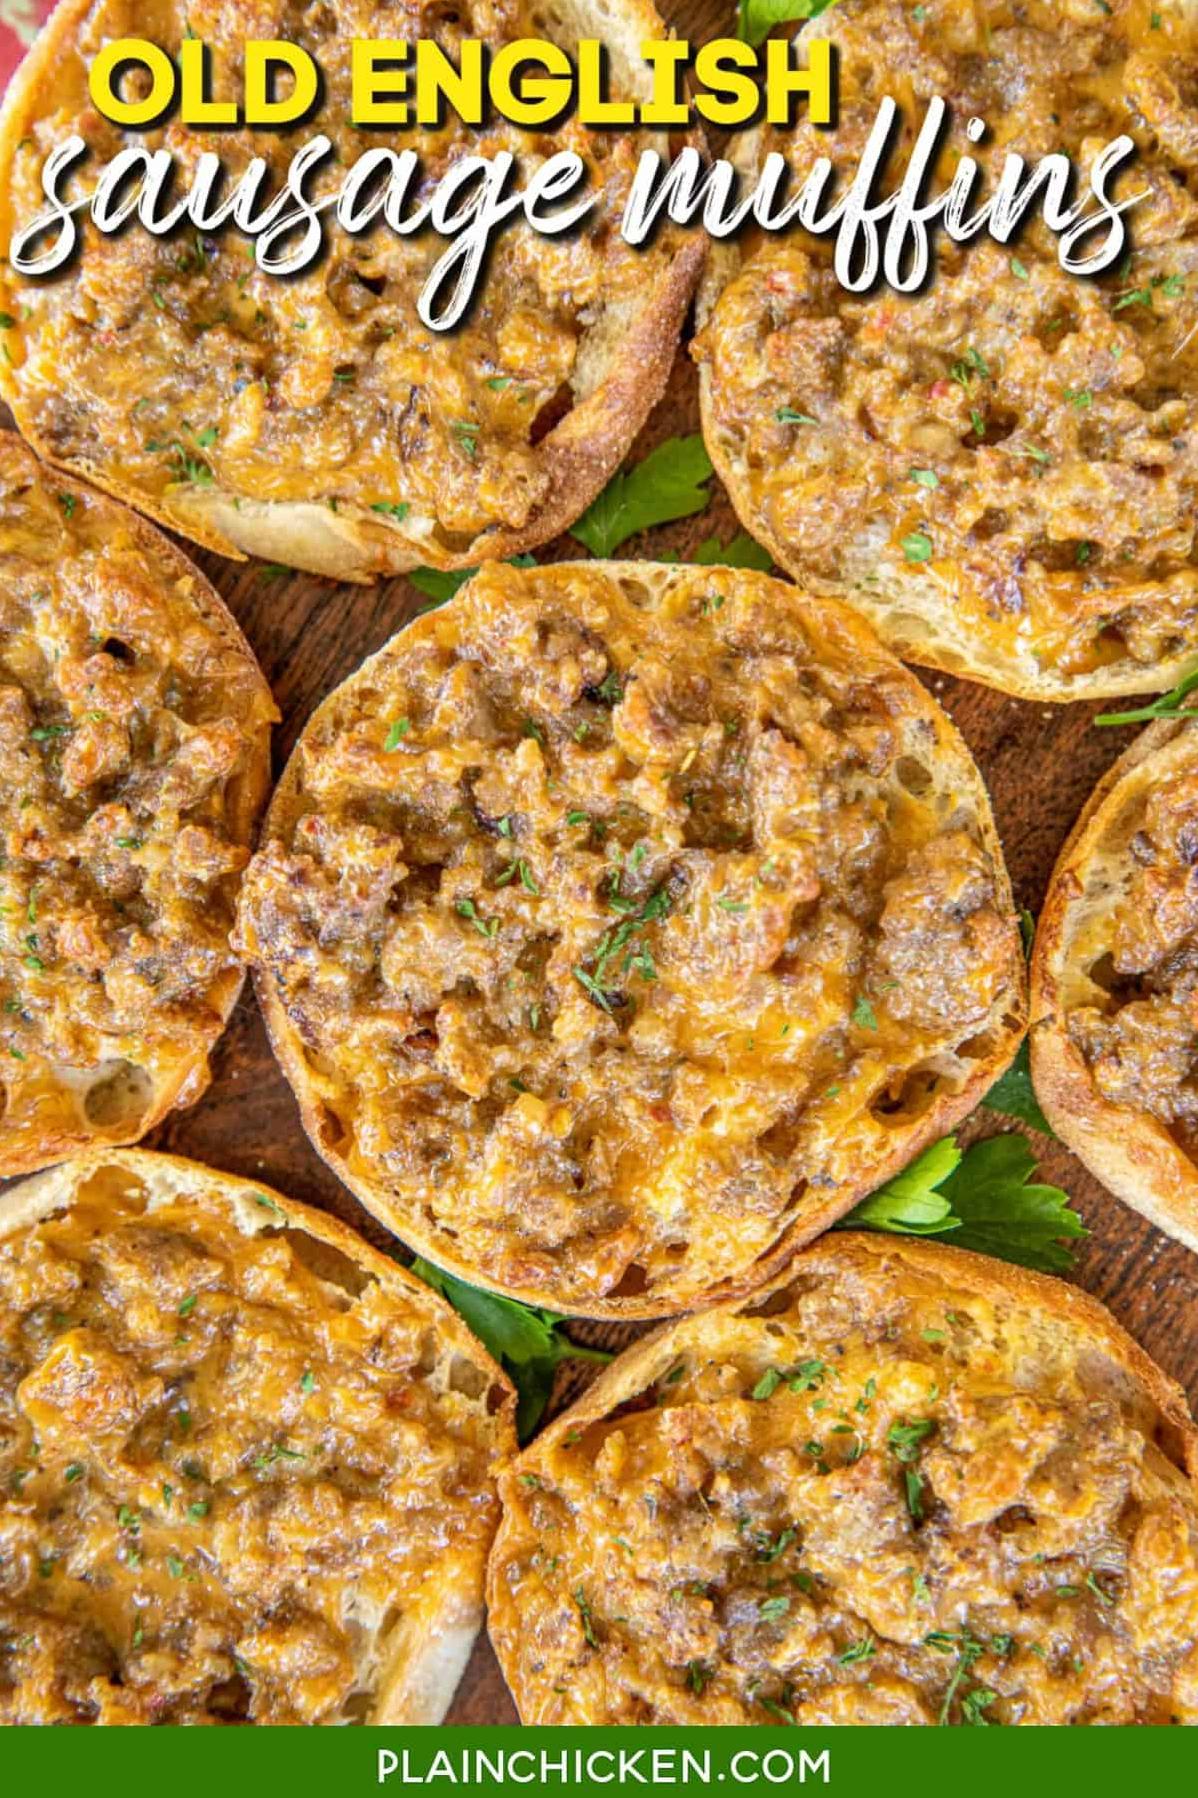  Start your day off right with these savory Sausage English Muffins